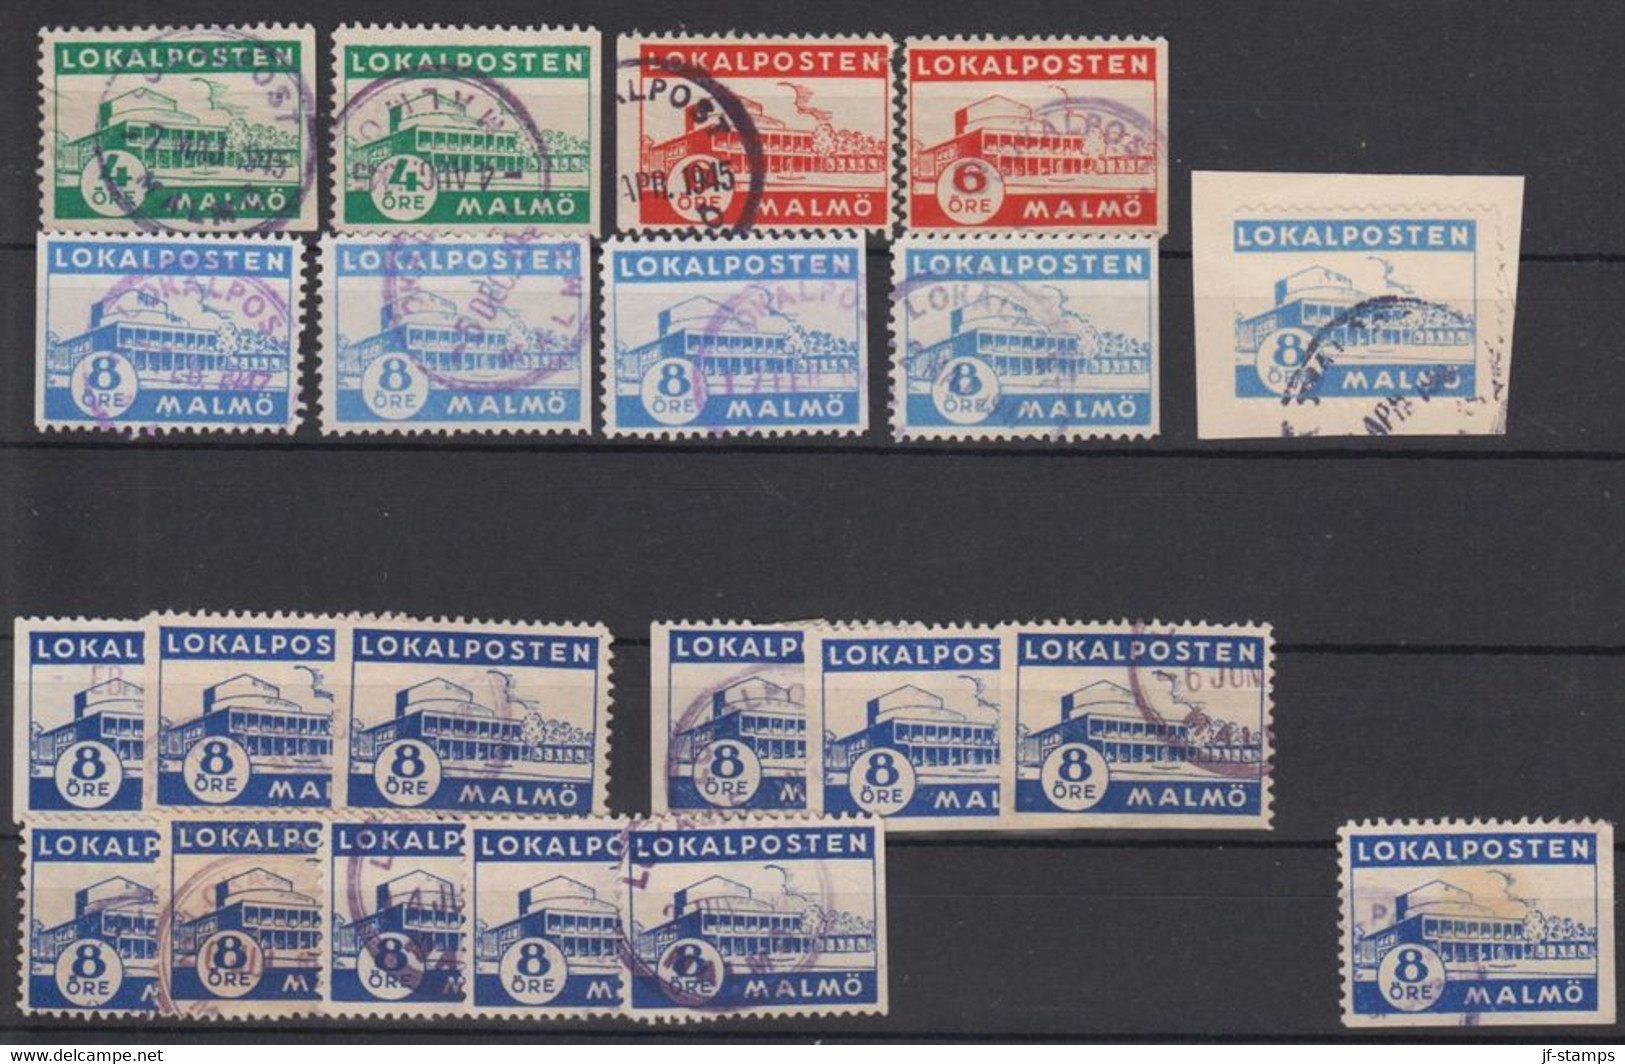 1945. SVERIGE. LOKALPOSTEN MALMÖ 21 Stamps All Cancelled.  - JF520114 - Local Post Stamps